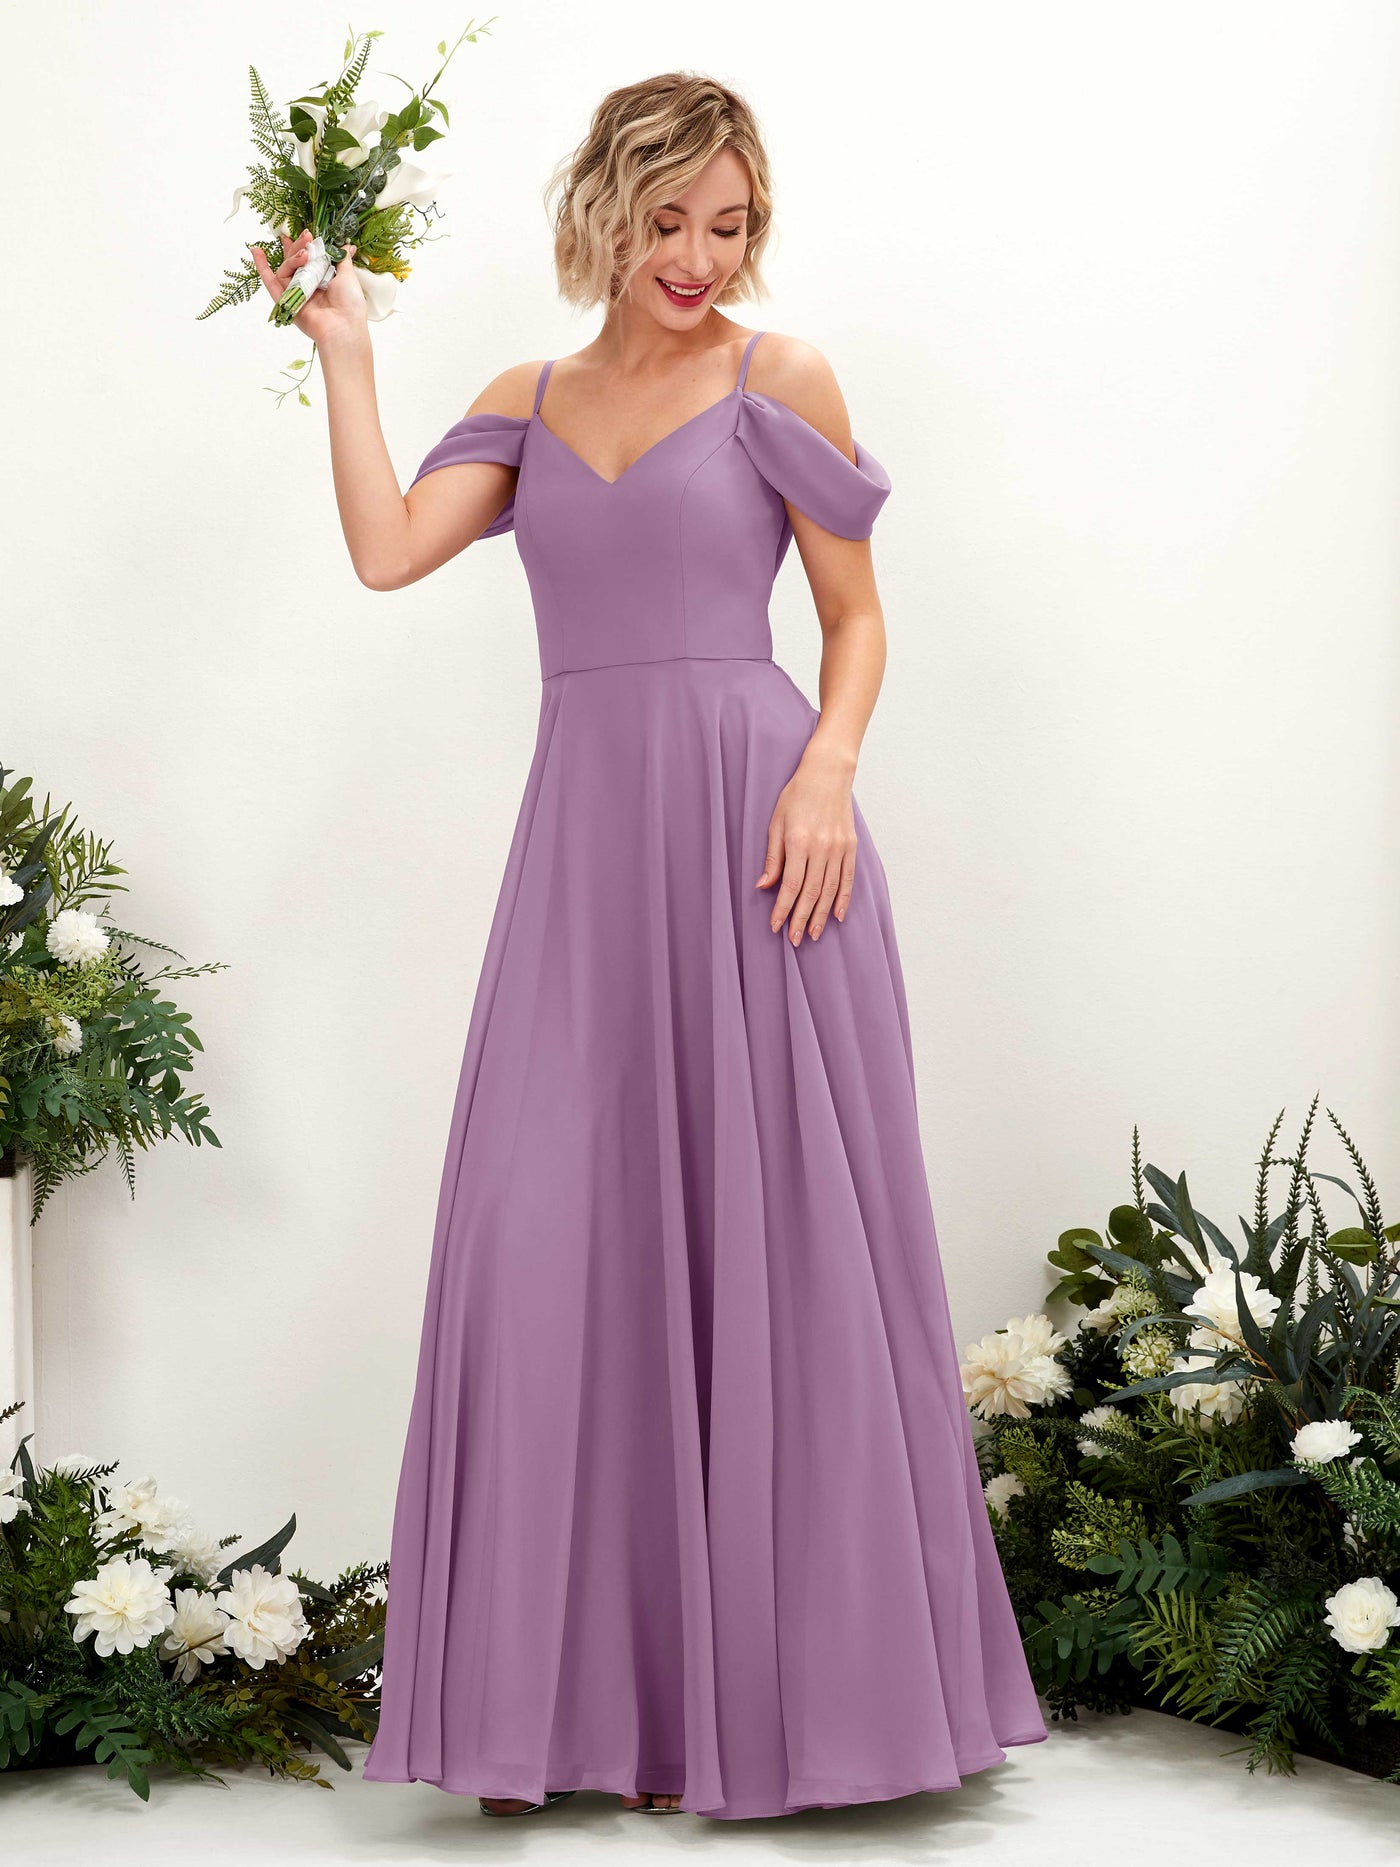 Orchid Mist Bridesmaid Dresses Bridesmaid Dress A-line Chiffon Off Shoulder Full Length Sleeveless Wedding Party Dress (81224921)#color_orchid-mist